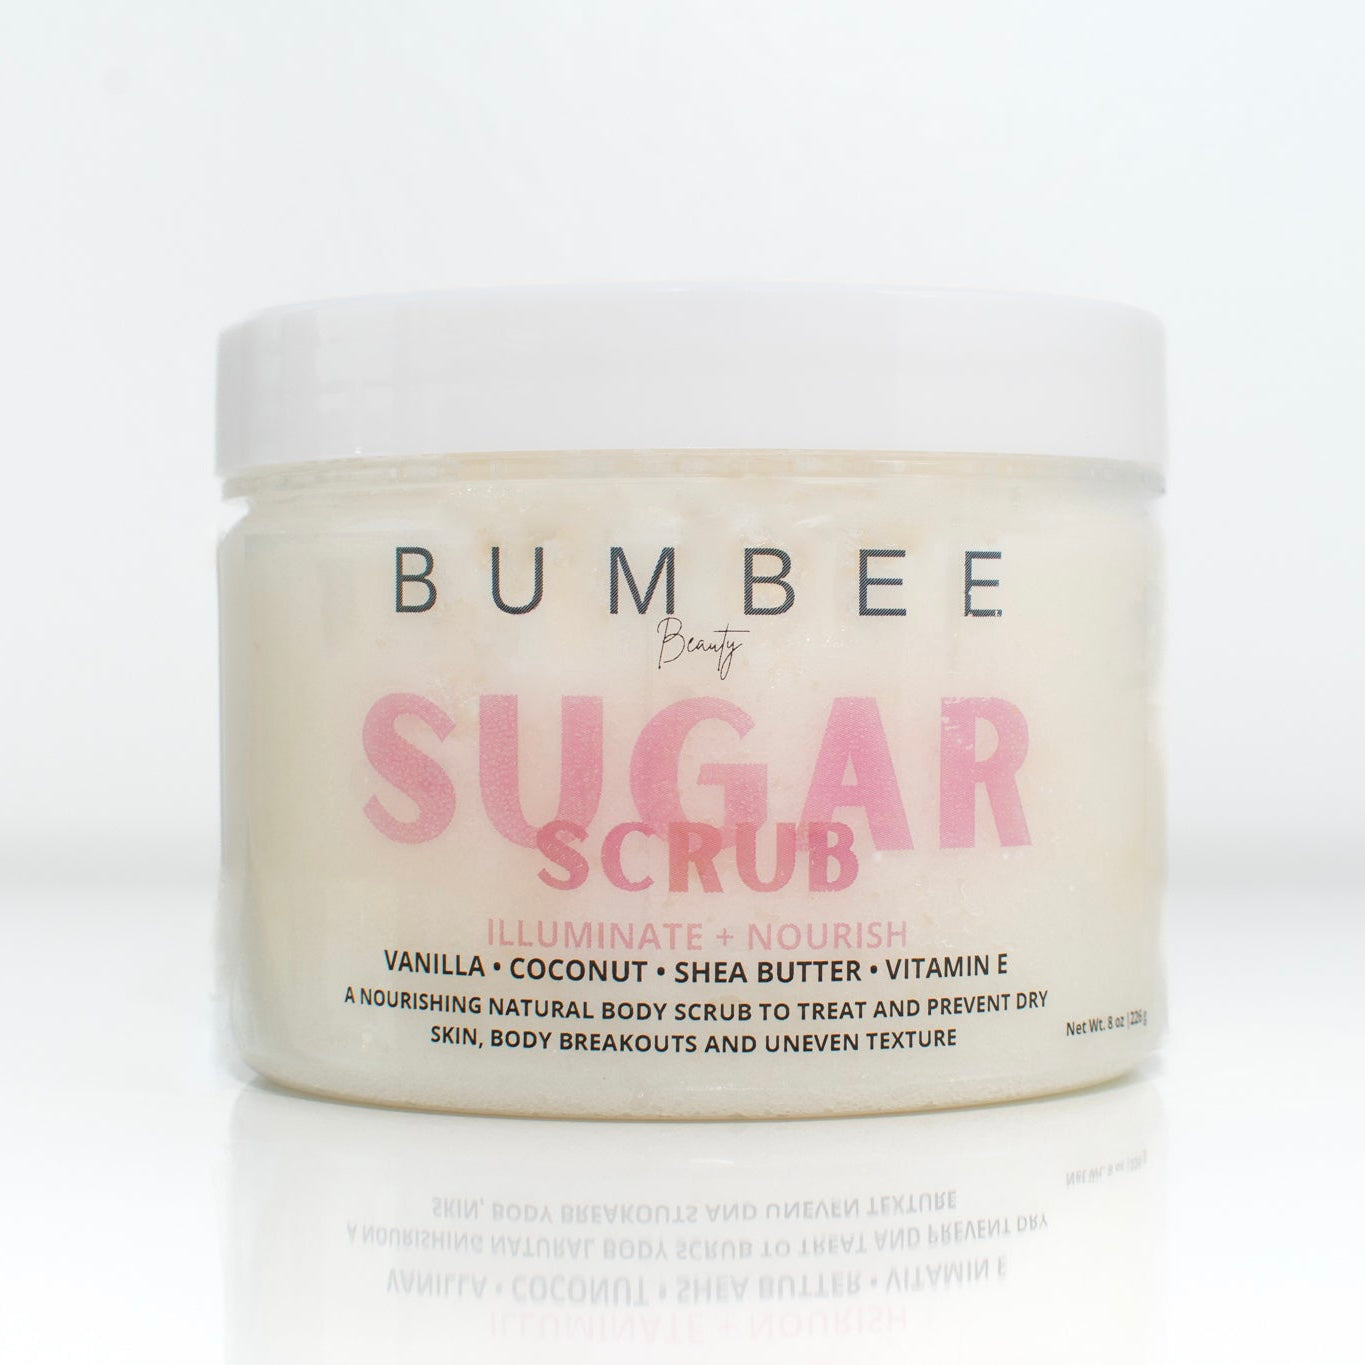 A jar of Bumbee Beauty Sugar Scrub with a white lid. The label reads 'illuminate and Nourish' and lists the ingredients as  coconut, shea butter, and vitamin E. The text below describes it as an nourishing natural body scrub to rest and prevent dry skin, body breakouts and uneven texture. The product has a white colour with pink and black text